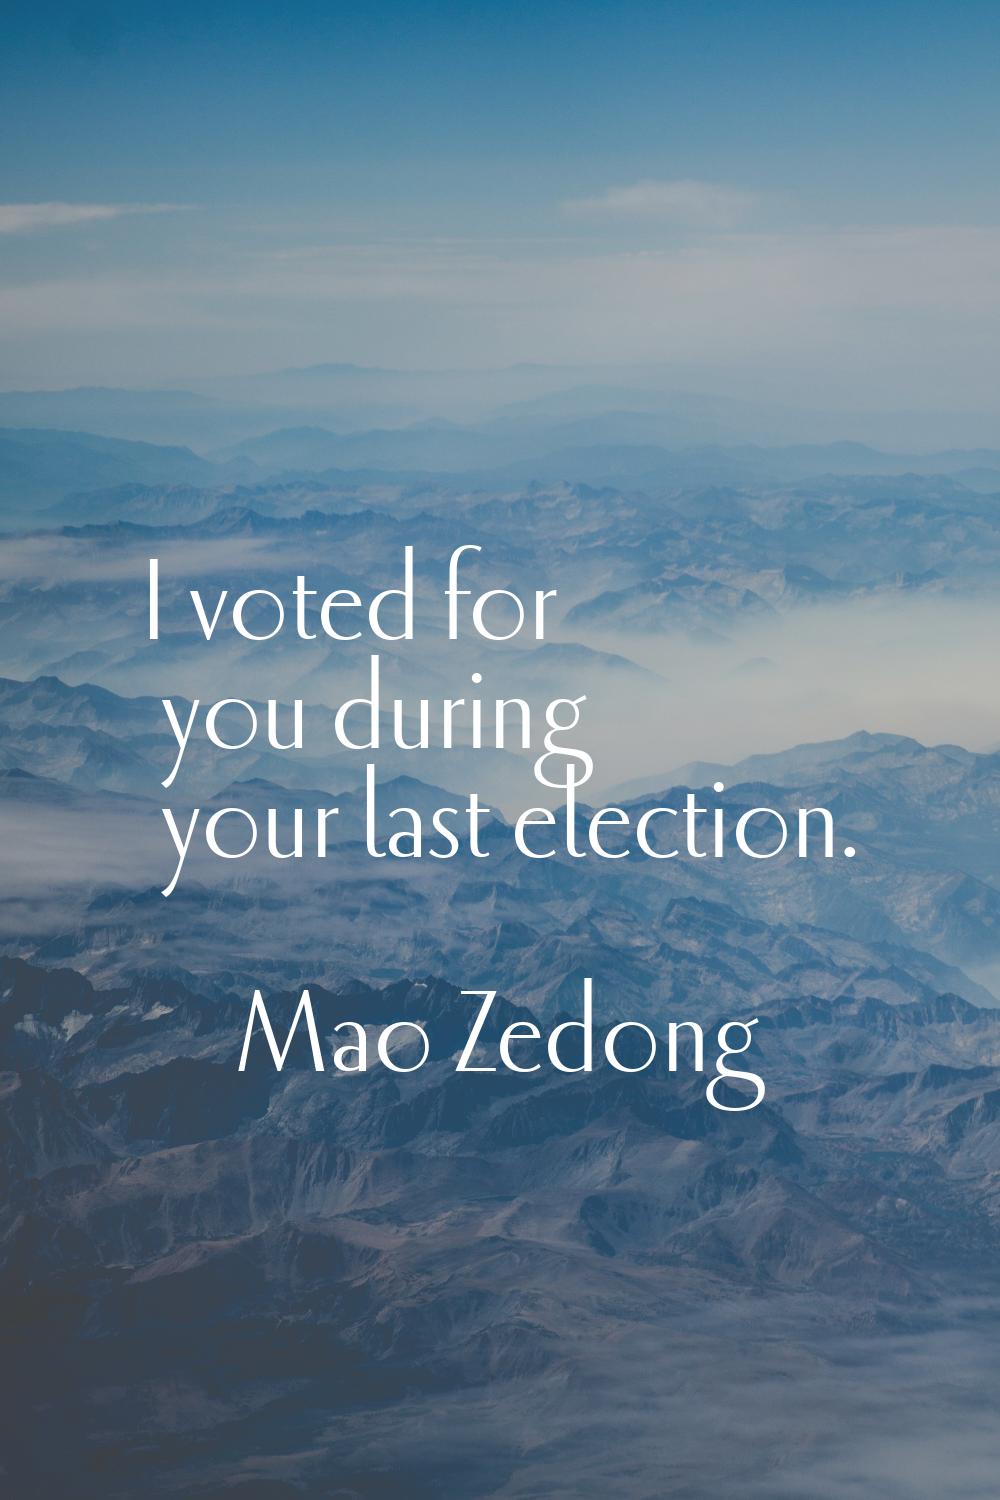 I voted for you during your last election.